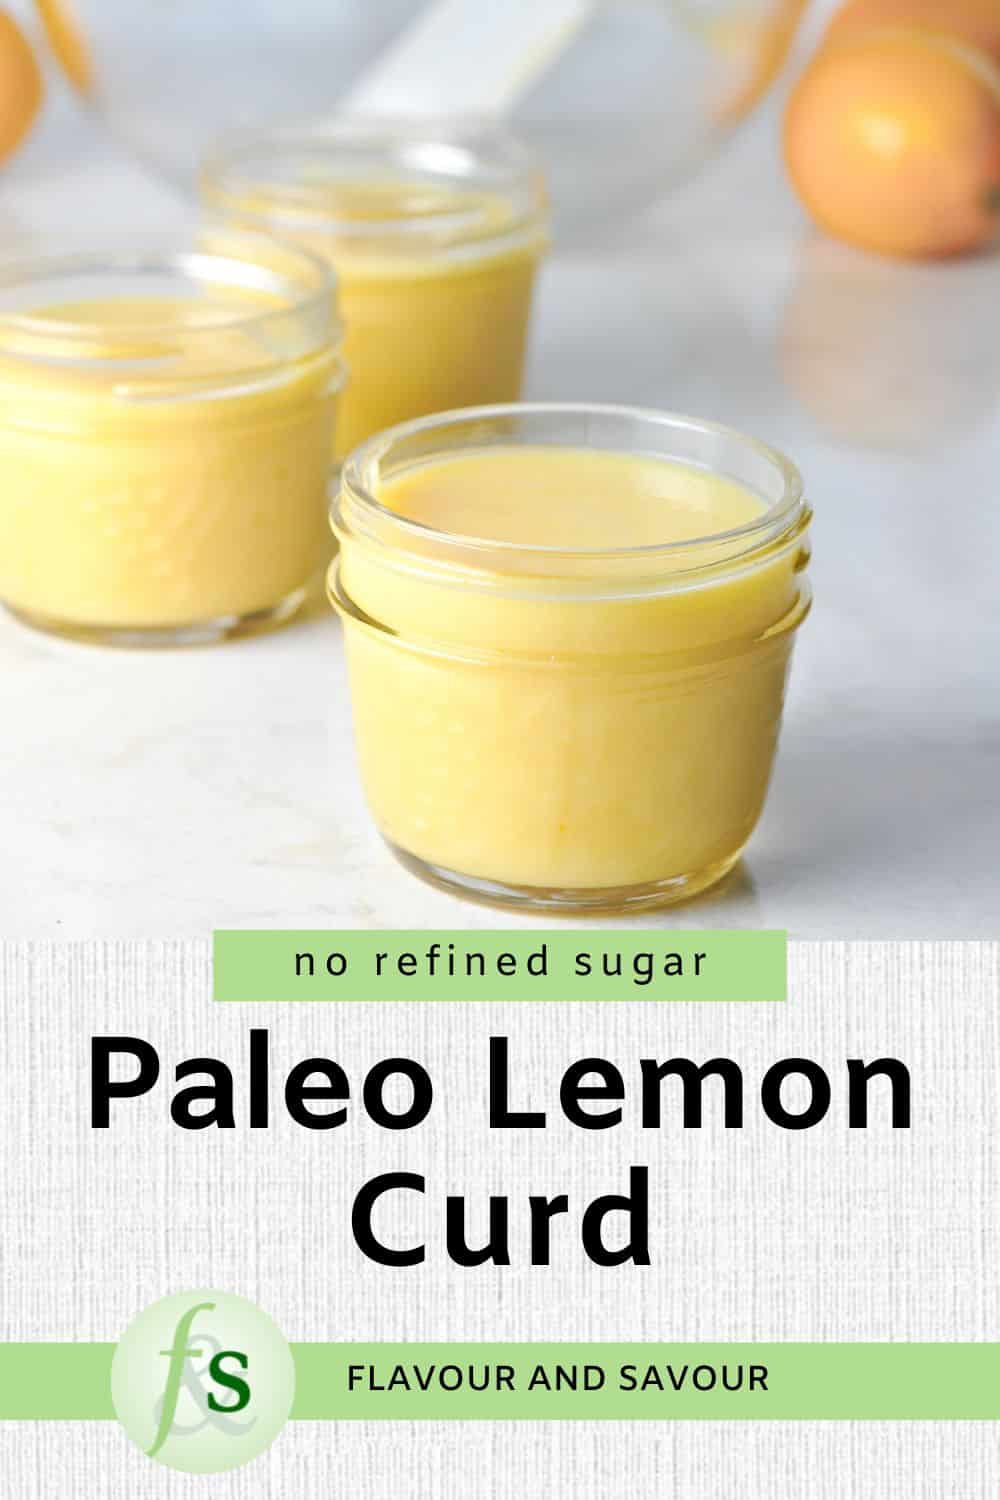 Image with text overlay for Paleo Lemon Curd.